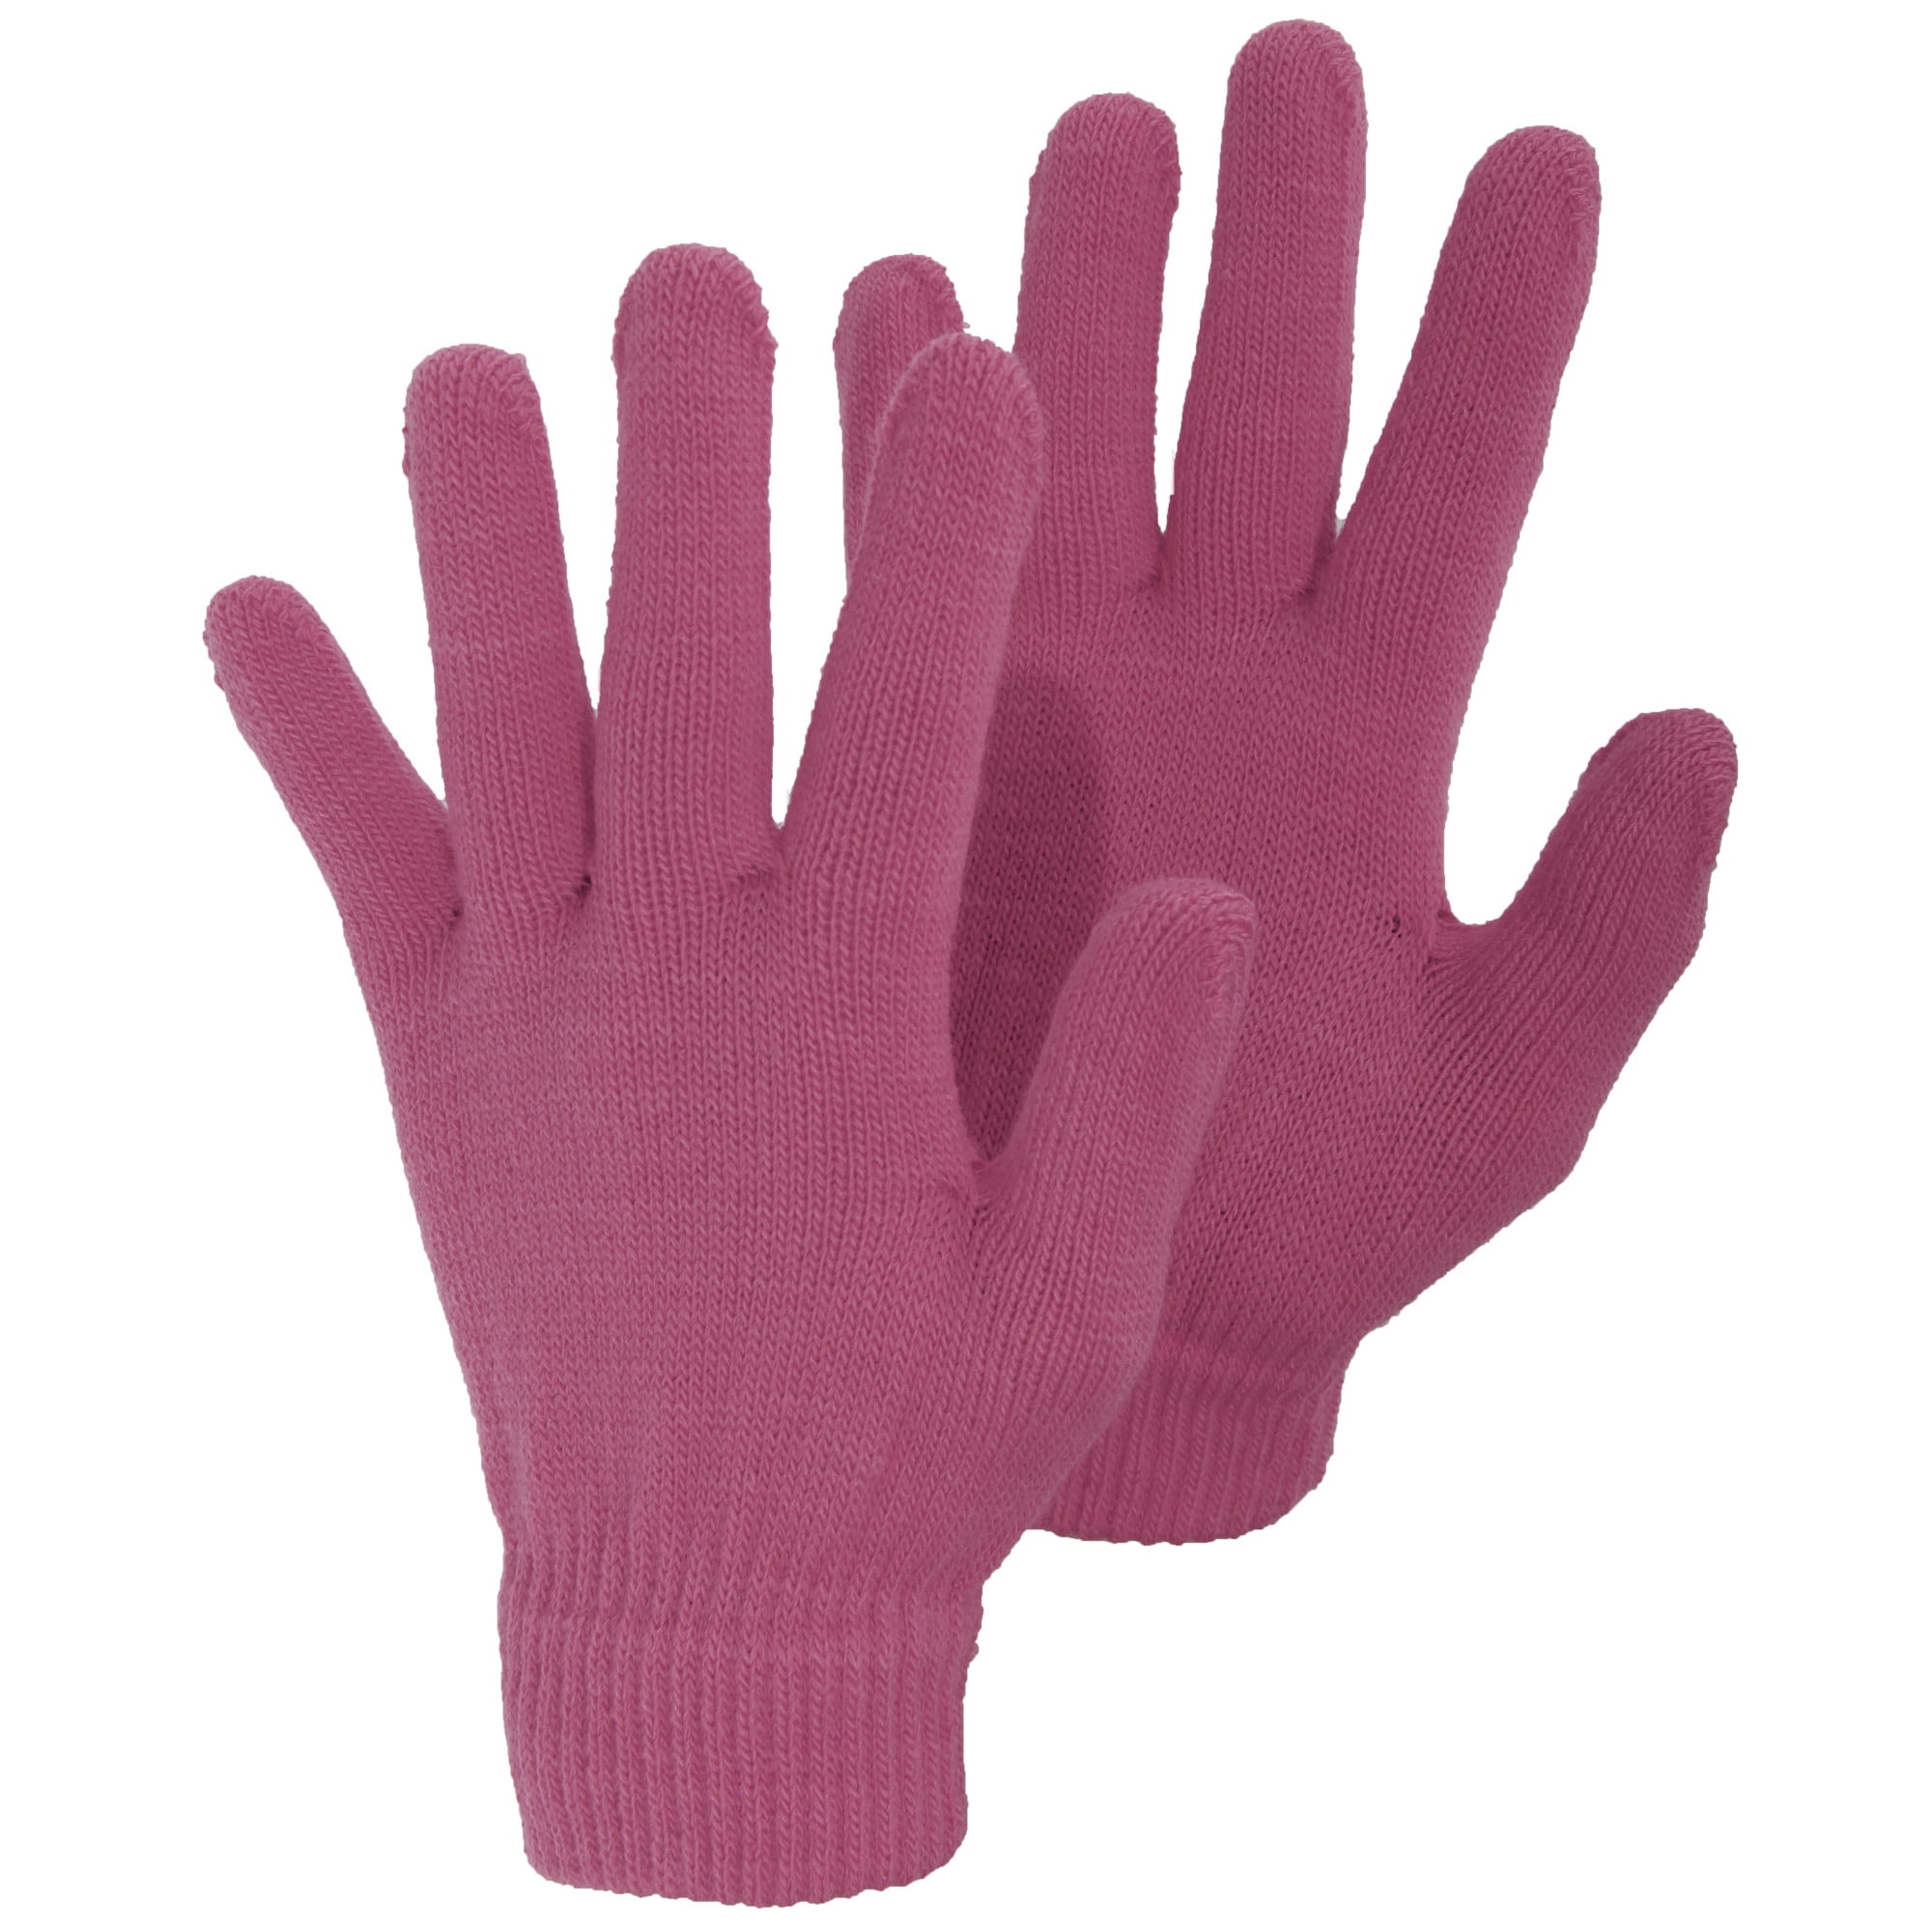 Womens Ladies Undercover Thermal Wool Mix Winter Magic Gloves 